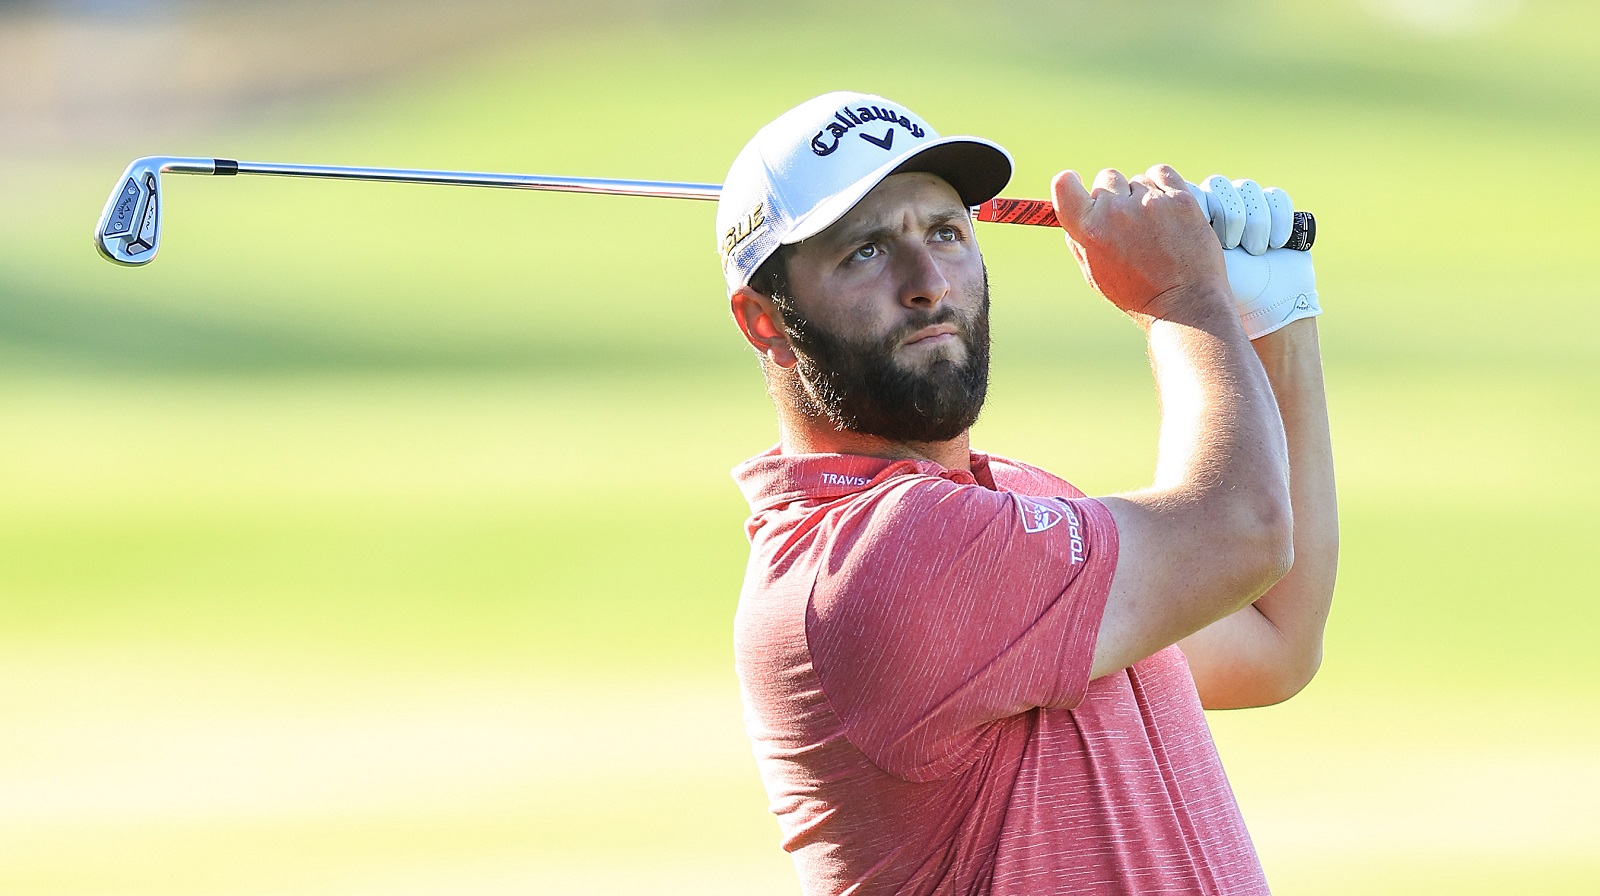 Jon Rahm plays his second shot on the par 4, 18th hole during the third round of The Players Championship at TPC Sawgrass on March 14, 2022.